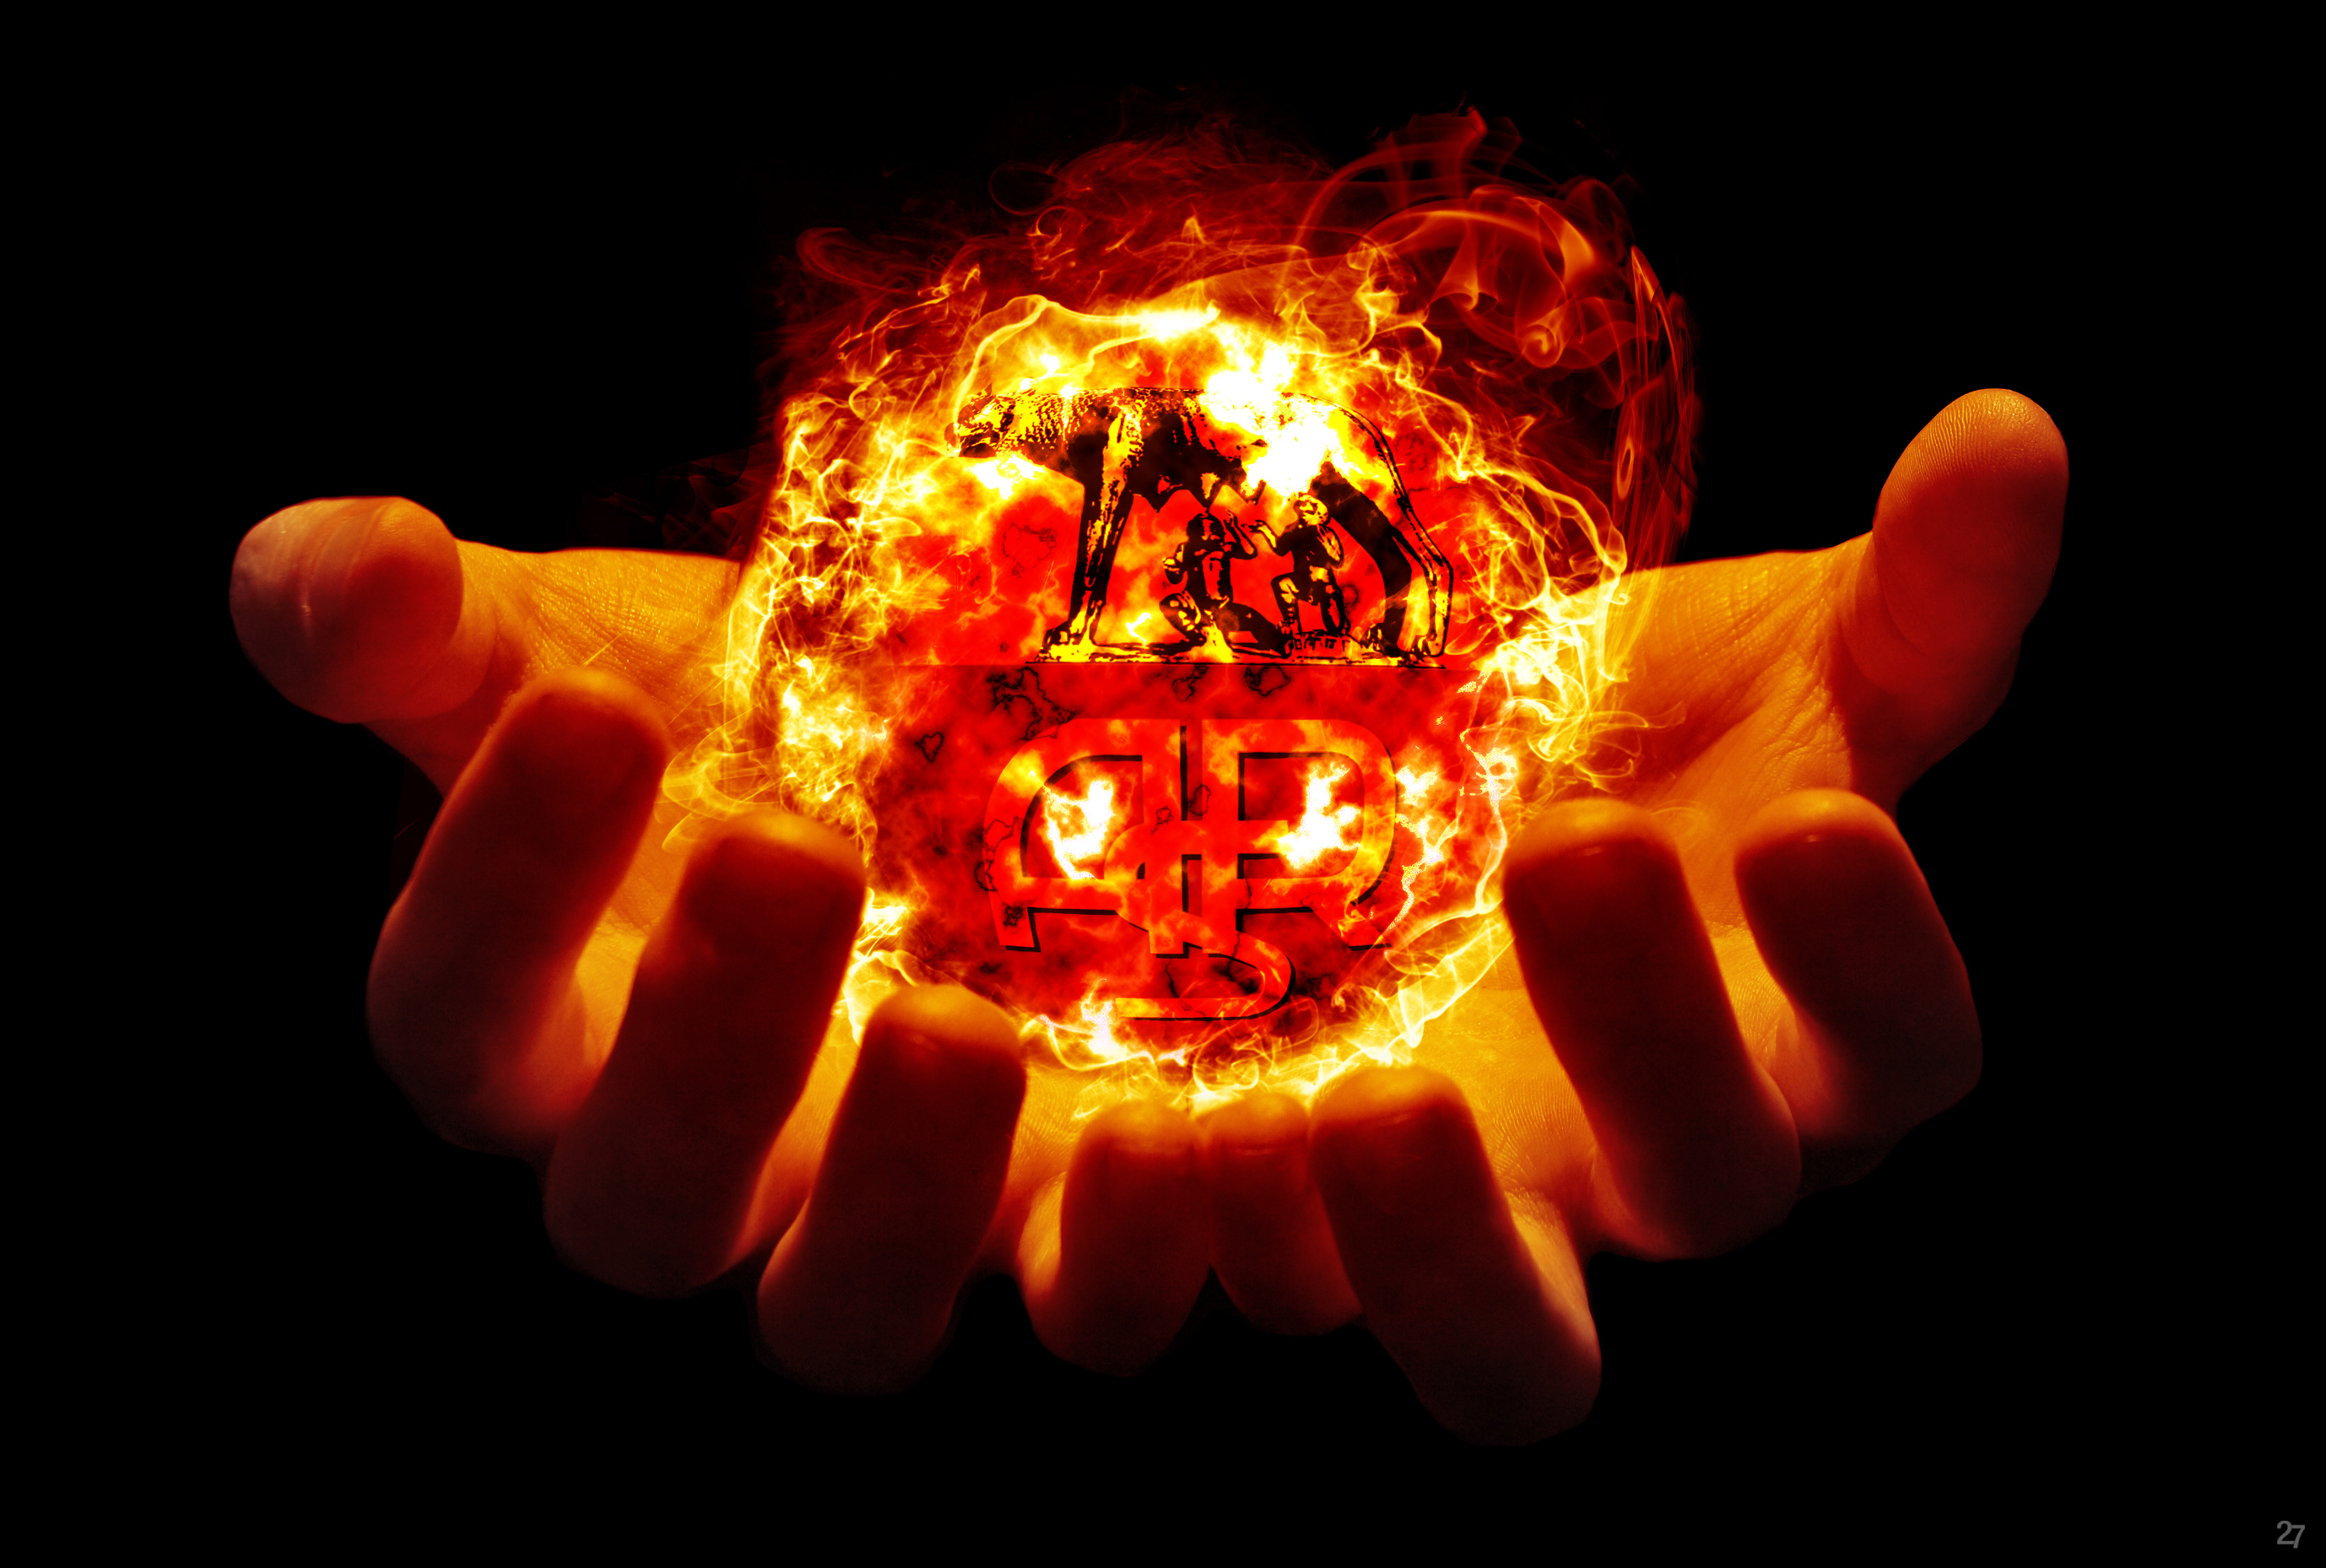 handle of fire ball